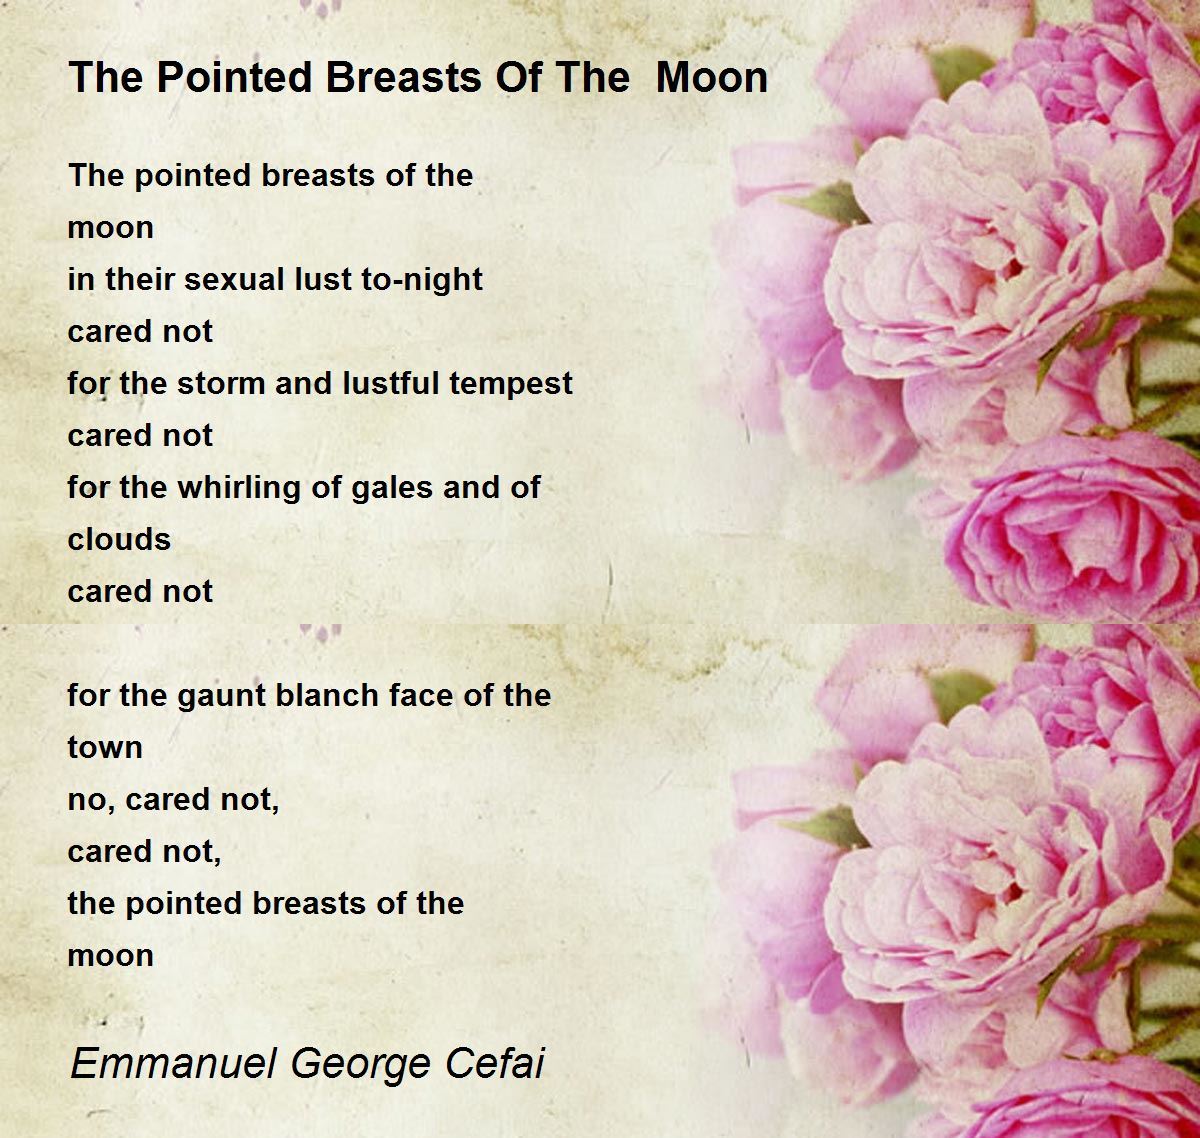 https://img.poemhunter.com/i/poem_images/417/the-pointed-breasts-of-the-moon.jpg